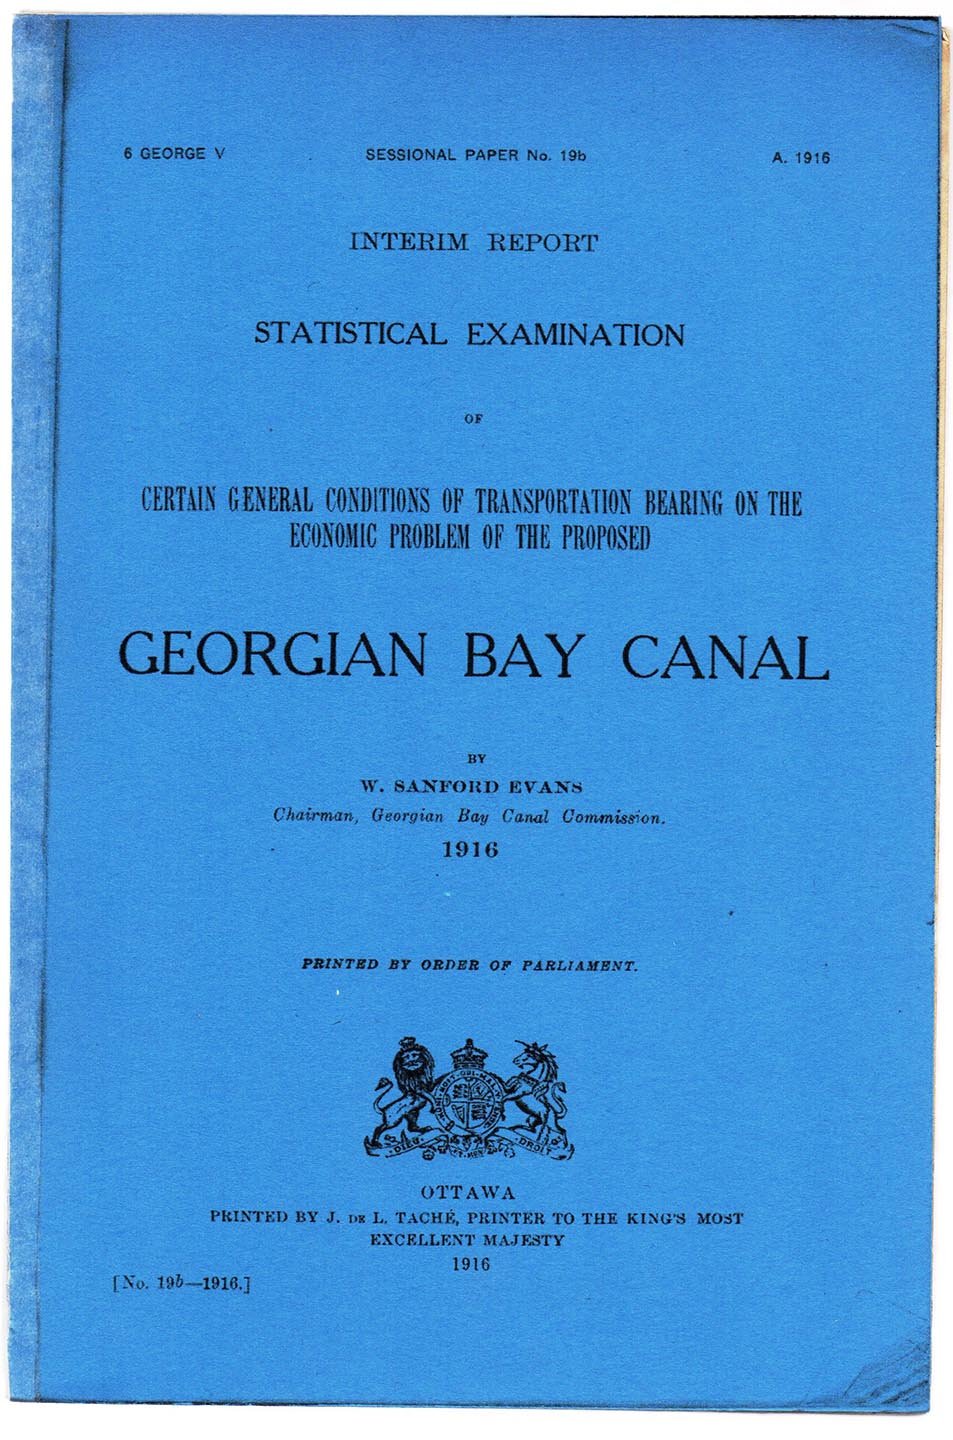 Interim Report. Statistical Examination of Certain General Conditions of Transportation Bearing on Economic Problem of the Proposed Georgian Bay Canal